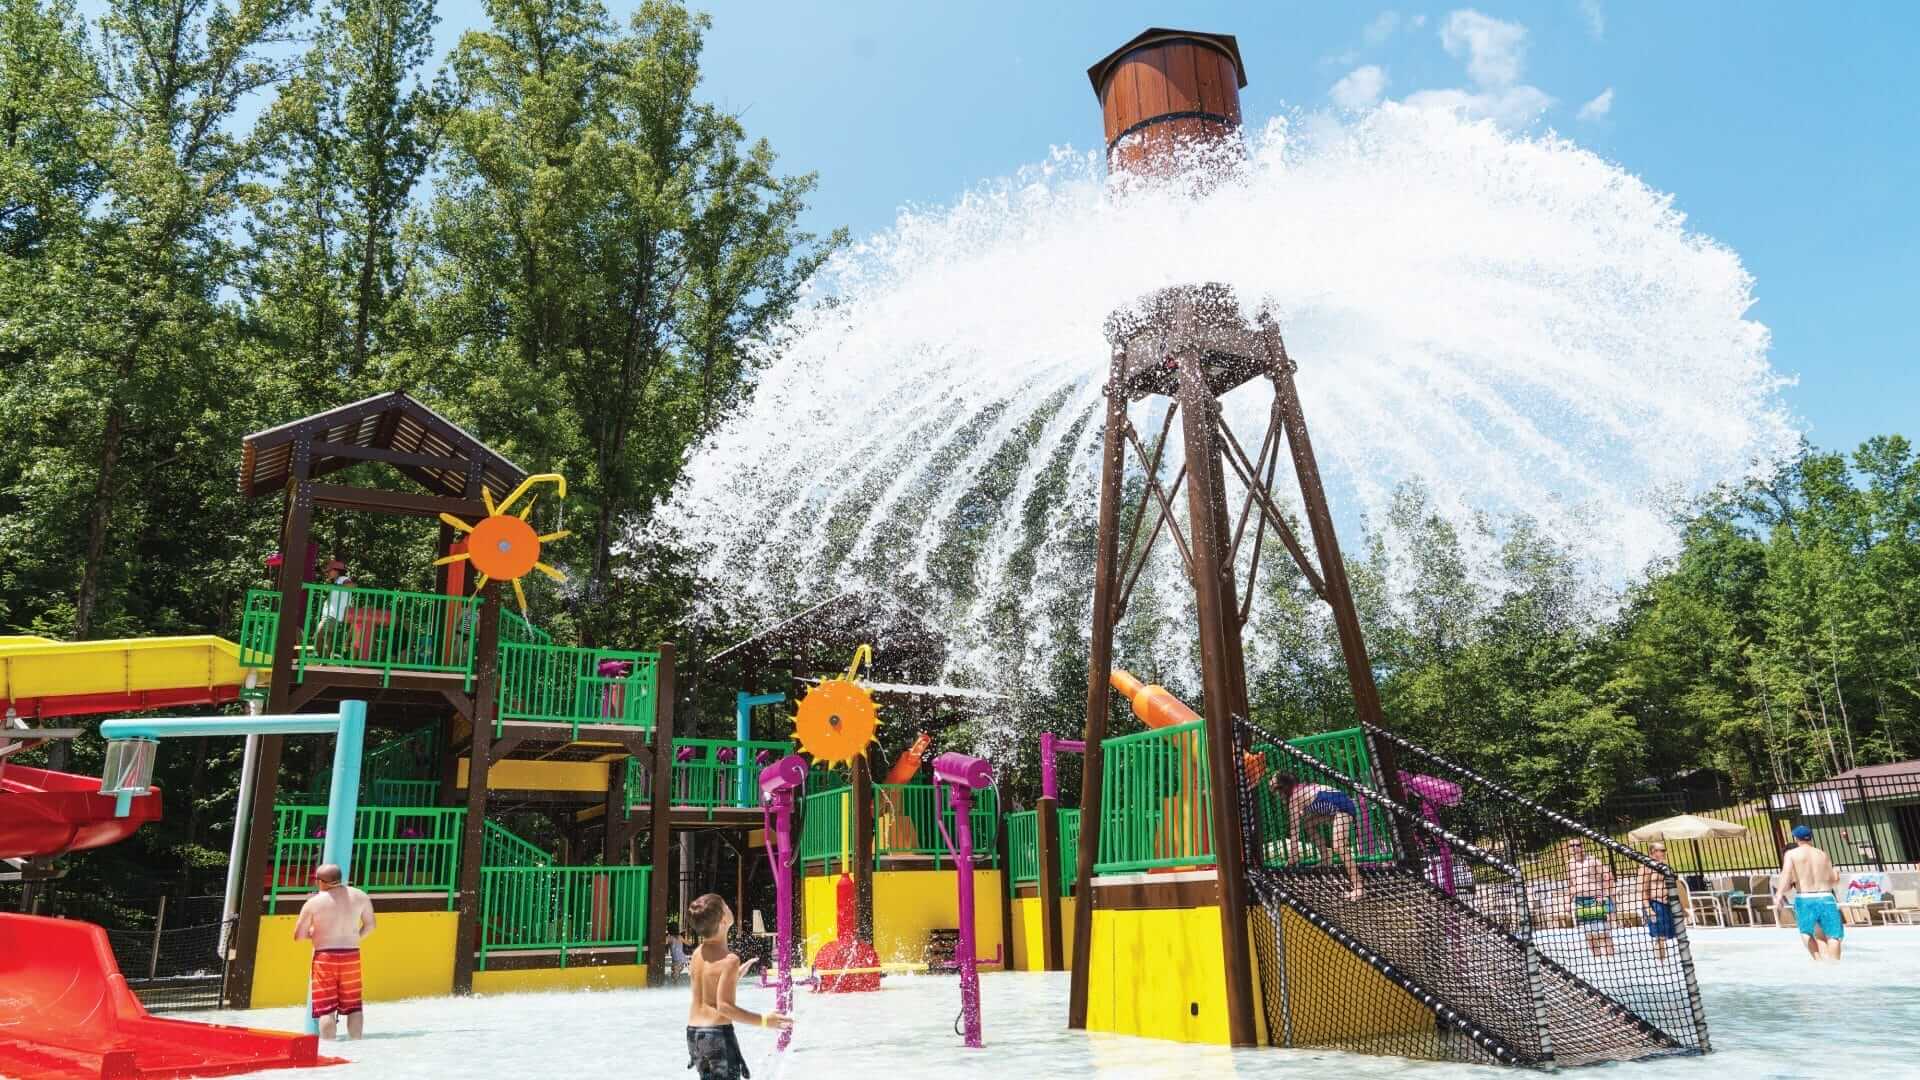 View of the Power Plunge and its 360-degree spray pattern, as kids look on at the water playground at the RV Resort in Bostic, North Carolina.